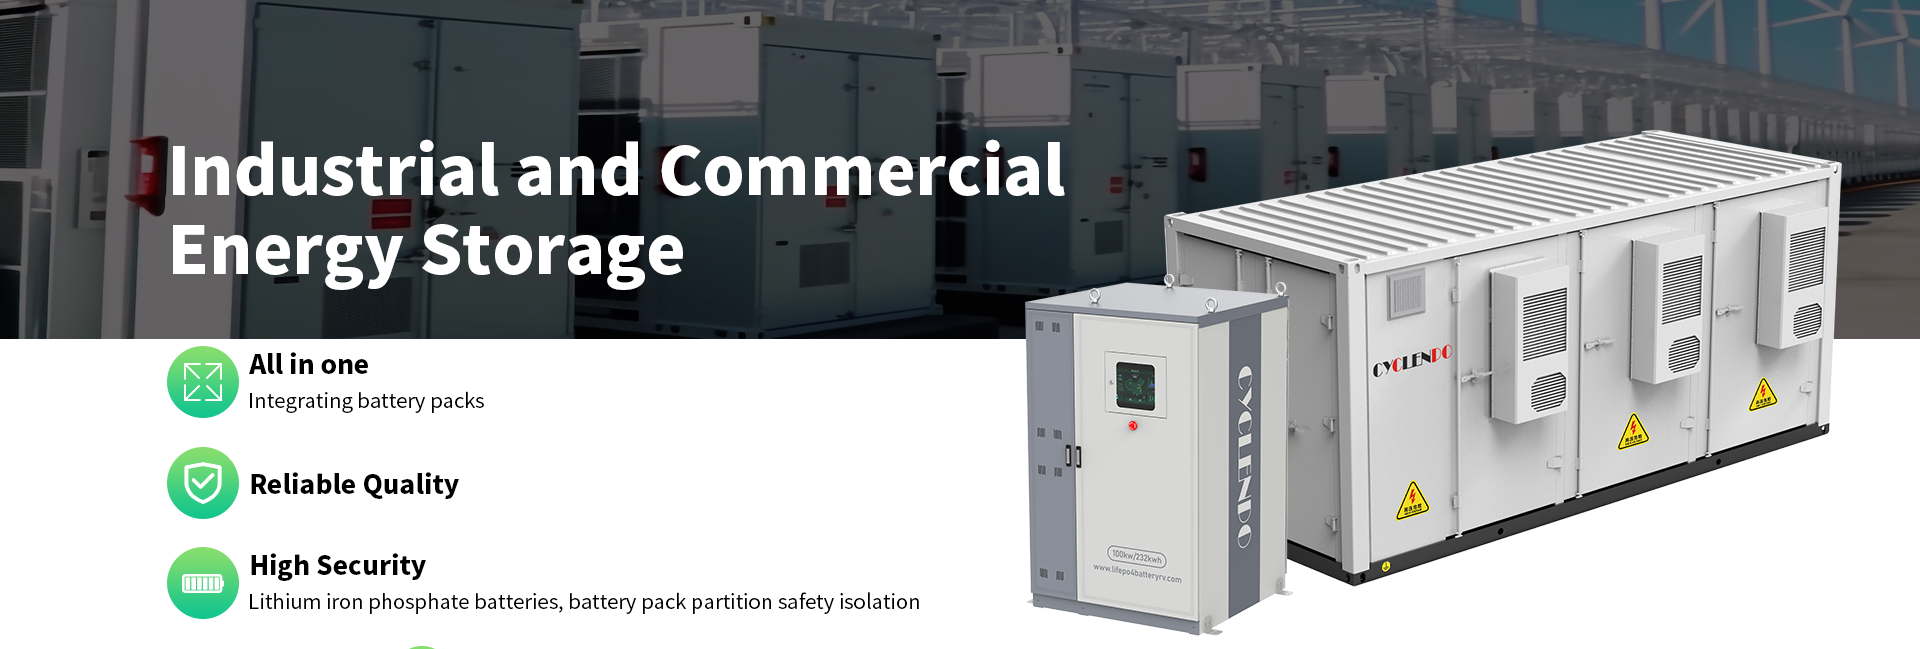 Commercial and Industrial Energy Storage Systems